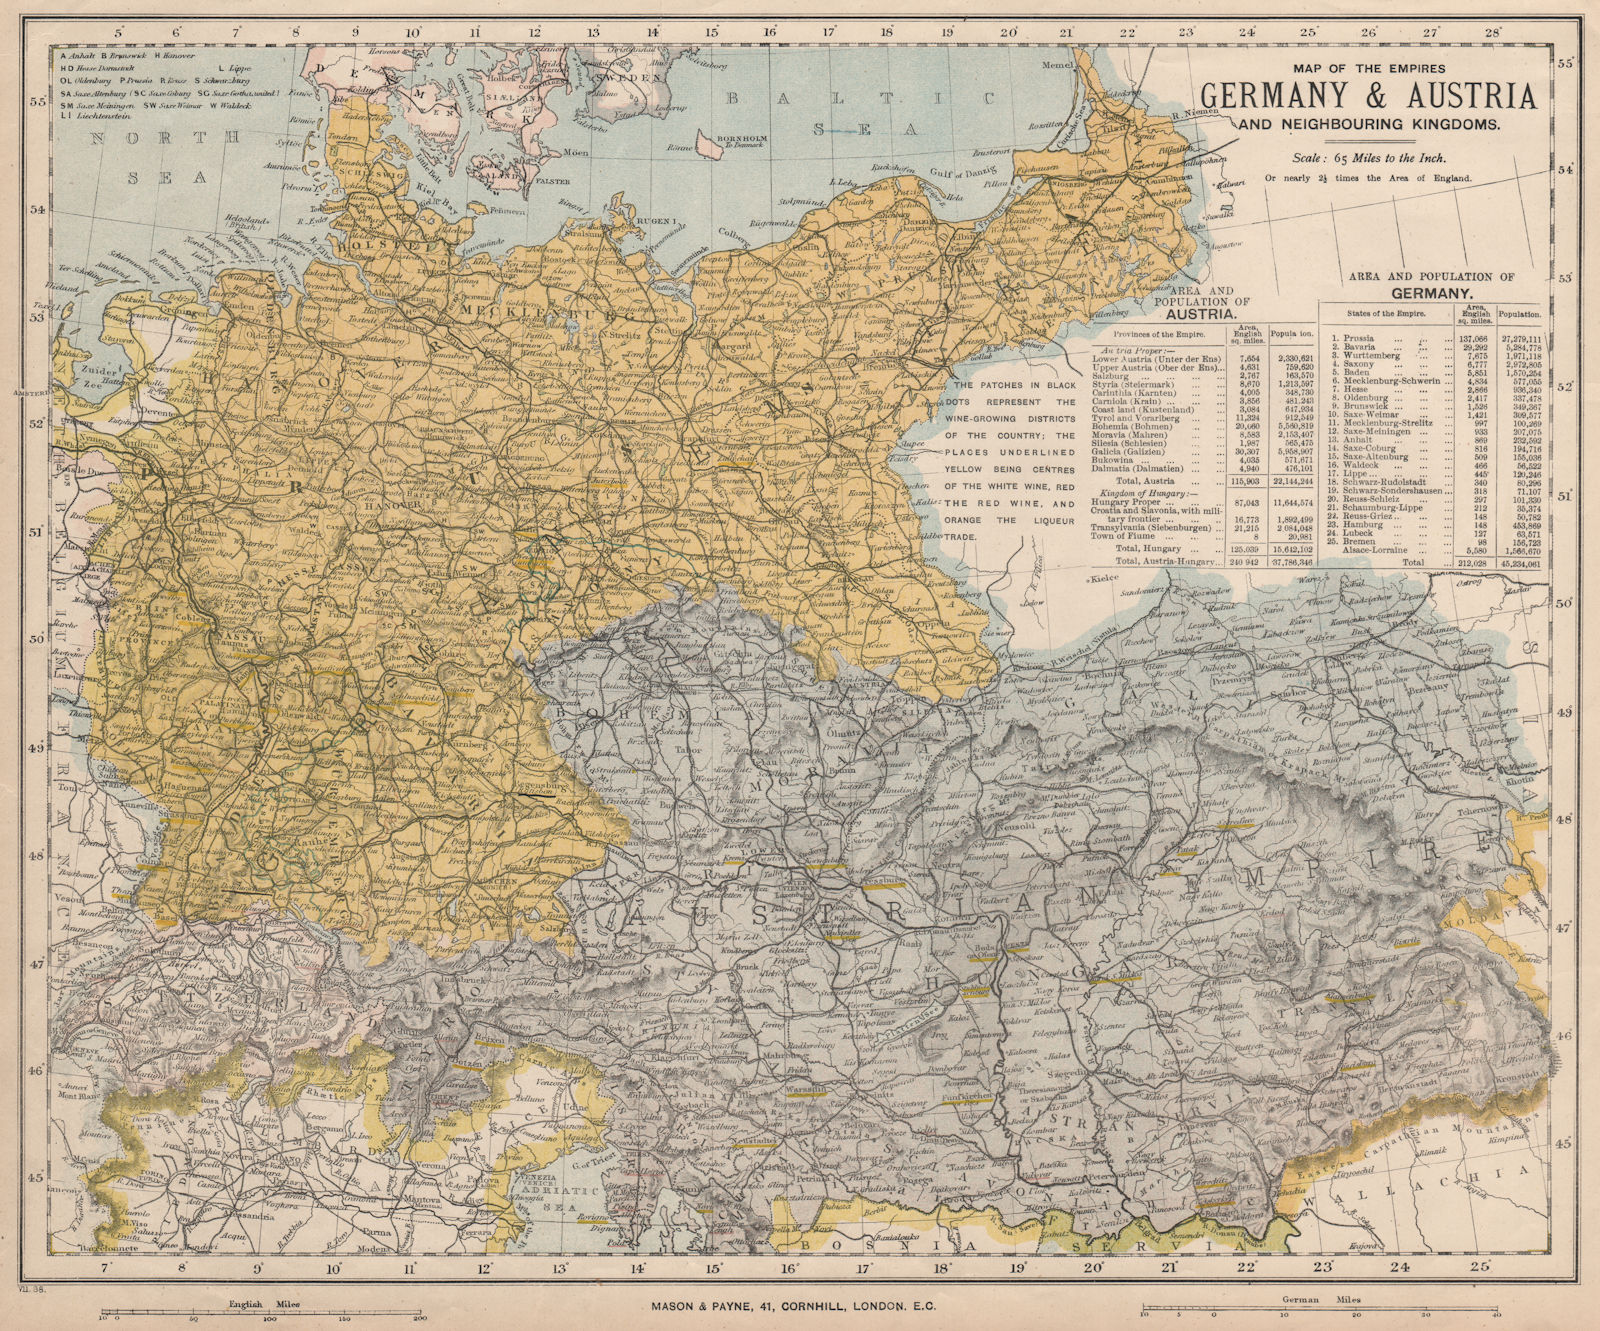 Associate Product GERMANY & AUSTRIA-HUNGARY. Red & white wine growing regions. LETTS 1889 map